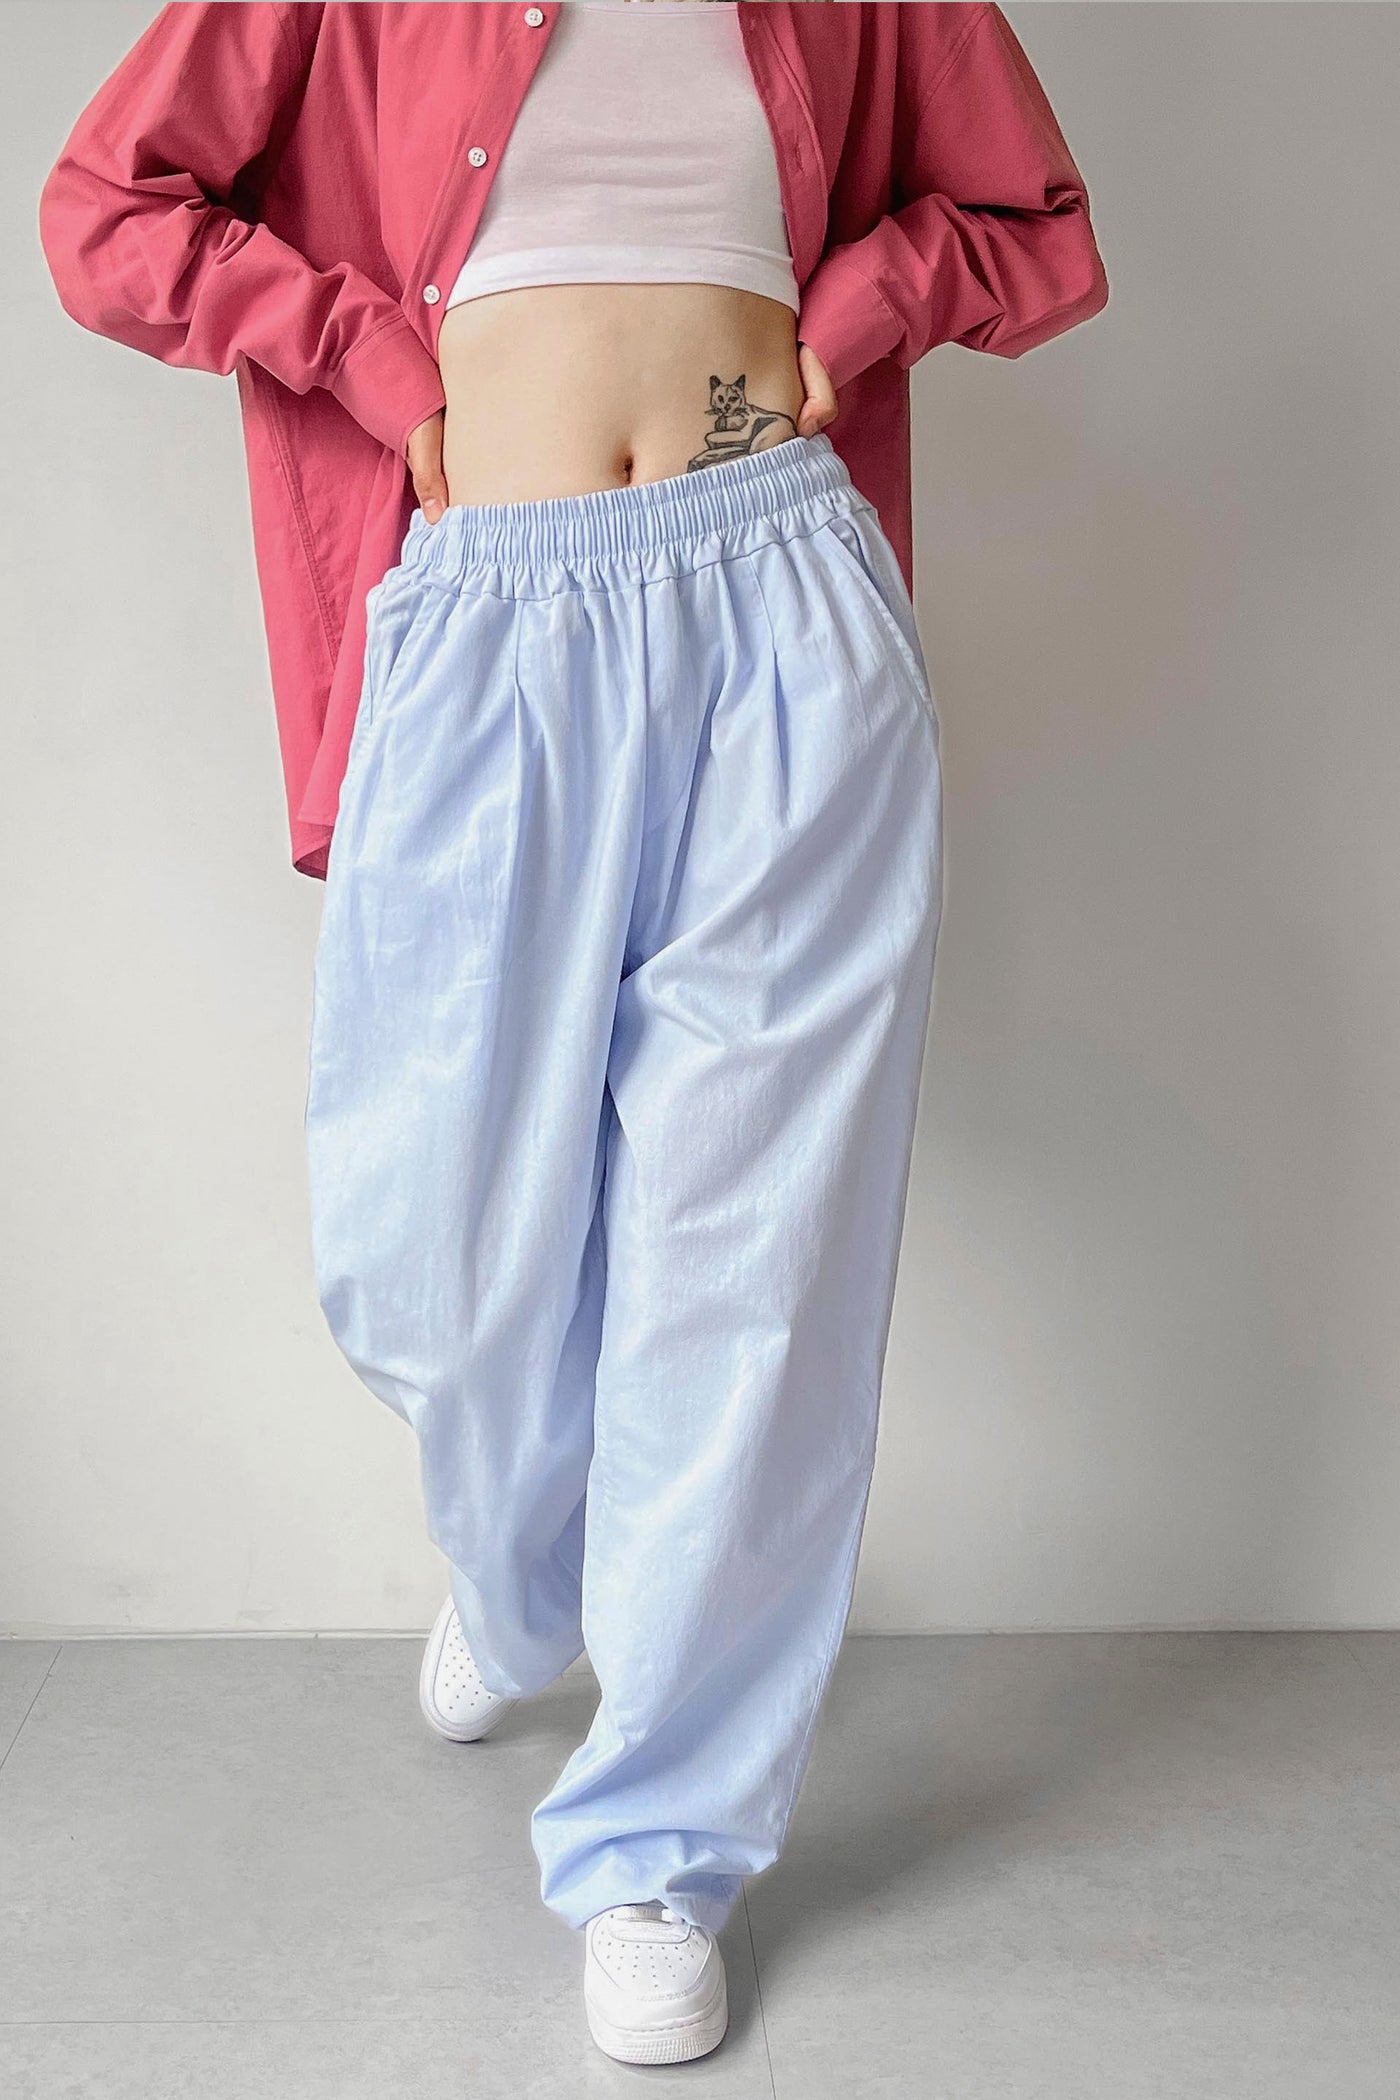 storets.com Mila Relaxed Fit Pants